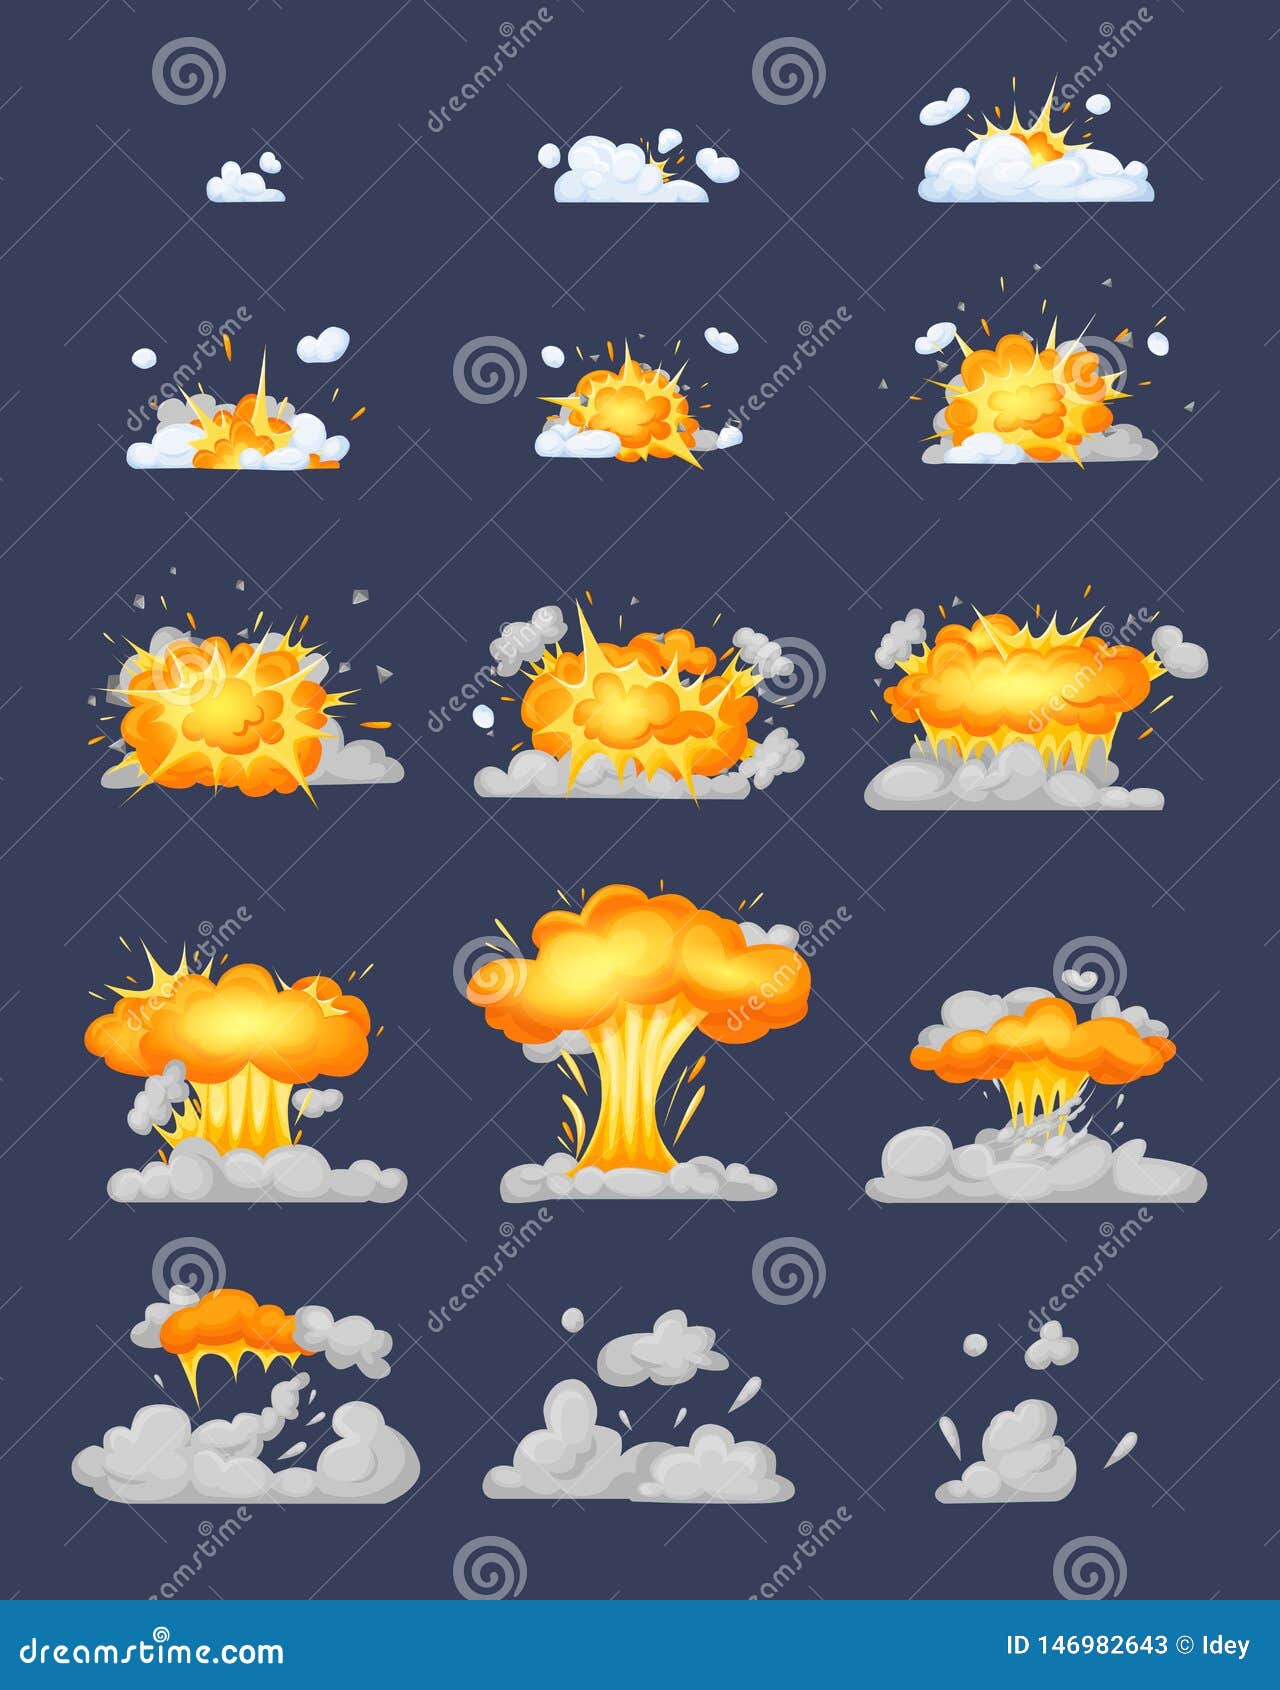 Frame Animation with Effect of Burning, Explosion, Divided into Frames.  Stock Vector - Illustration of energy, move: 146982643